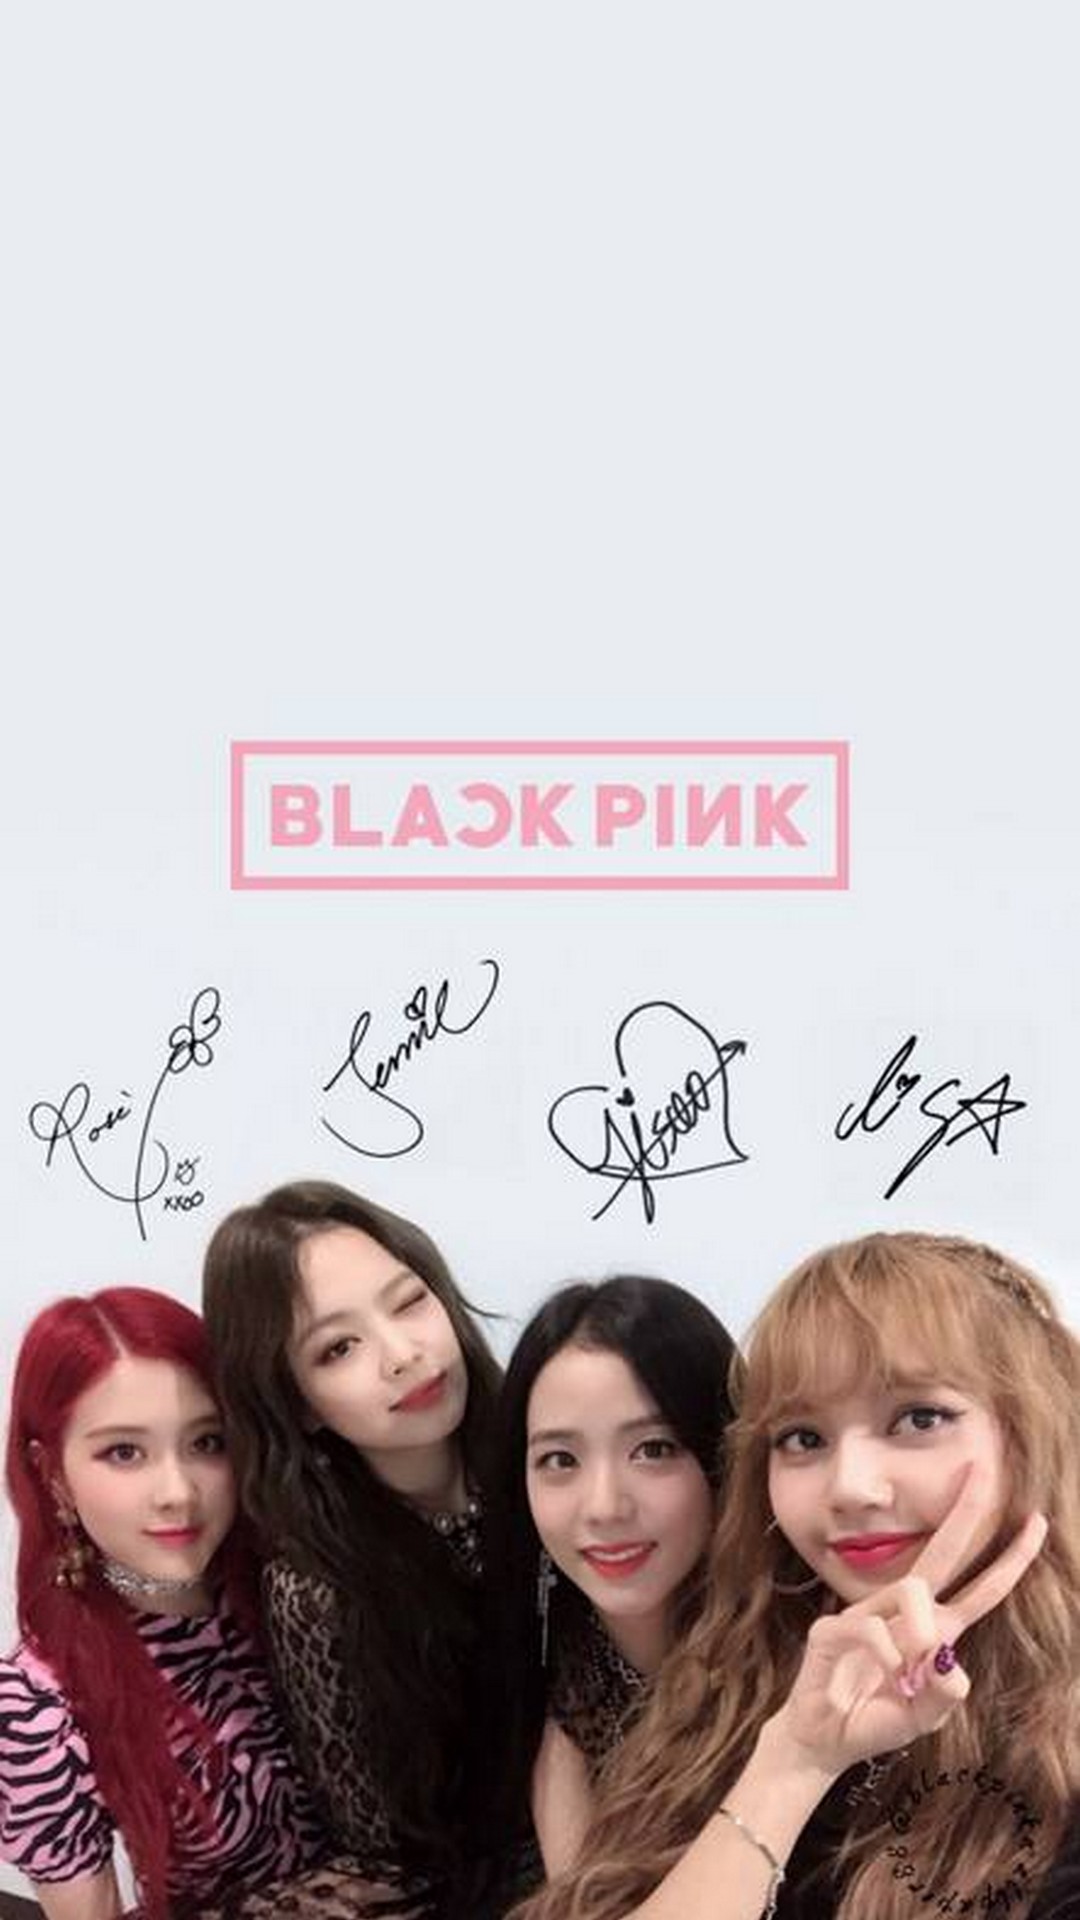 Wallpaper Blackpink Android With high-resolution 1080X1920 pixel. You can use this wallpaper for your Android backgrounds, Tablet, Samsung Screensavers, Mobile Phone Lock Screen and another Smartphones device